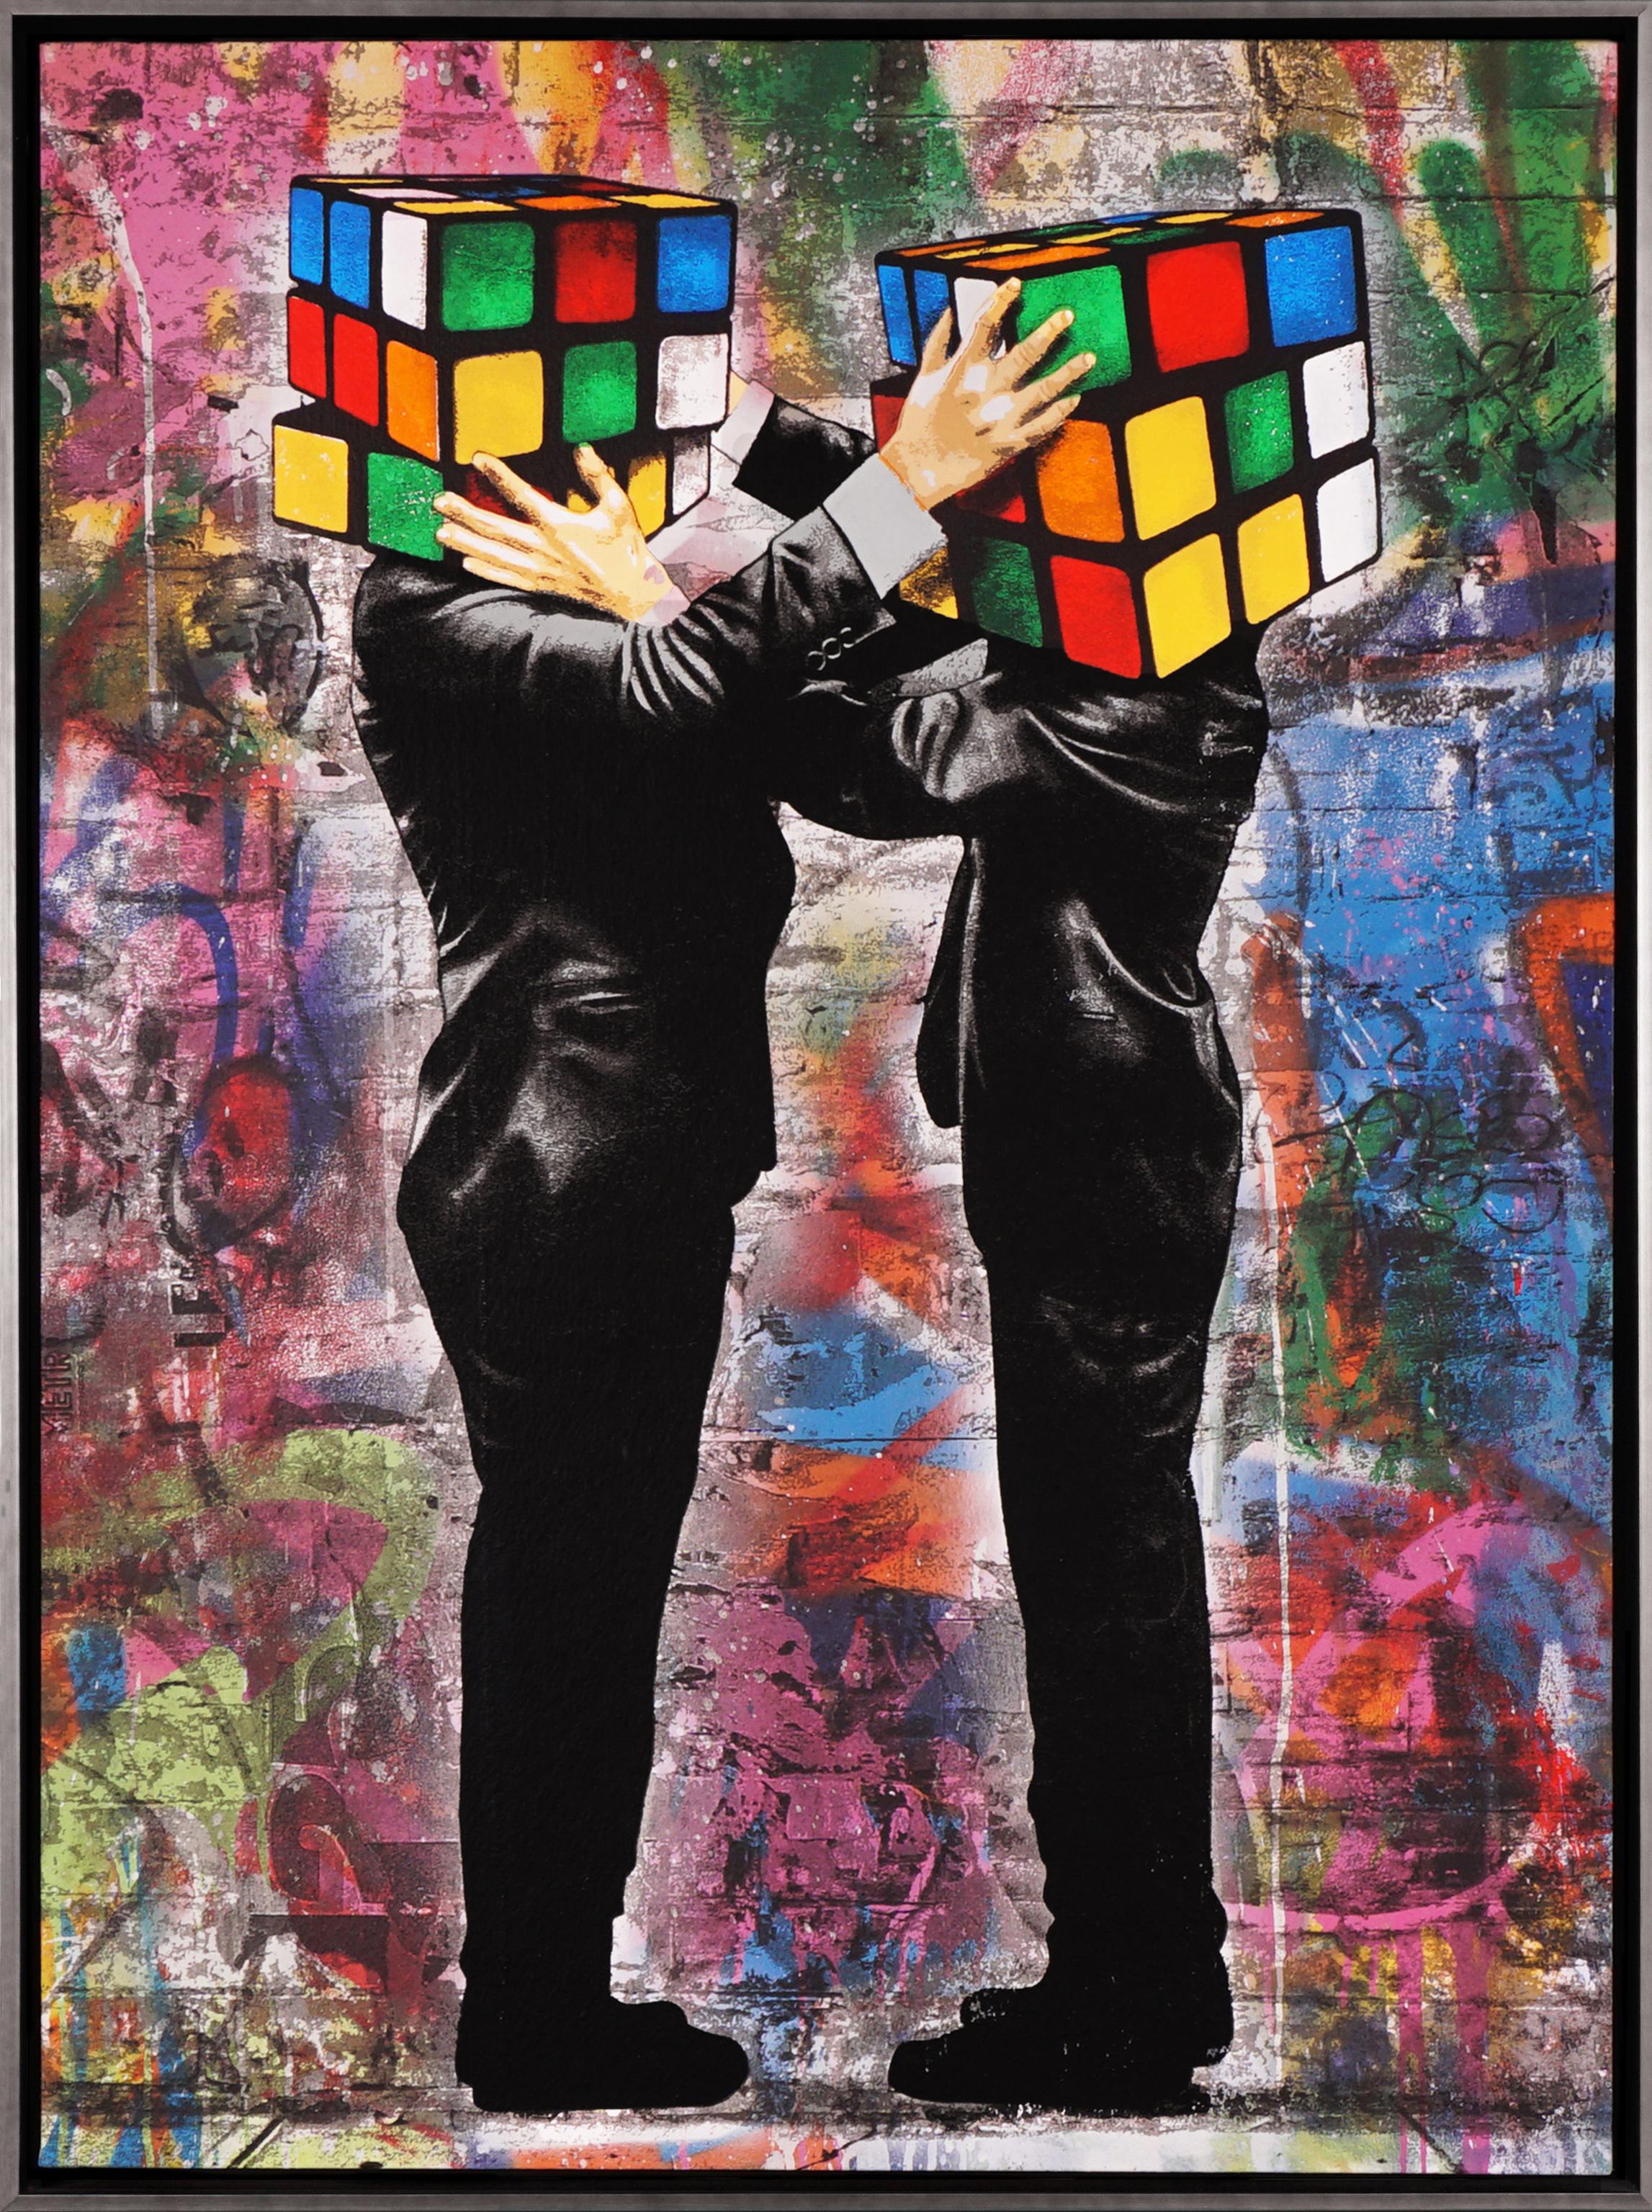 'Puzzled II' by Hijack is a silkscreen and mixed media work on canvas, created in 2020. Signed by the Artist, this work possesses striking subject matter and the street-style flair Hijack has become well-known for. ‘Puzzled II’ comes in a